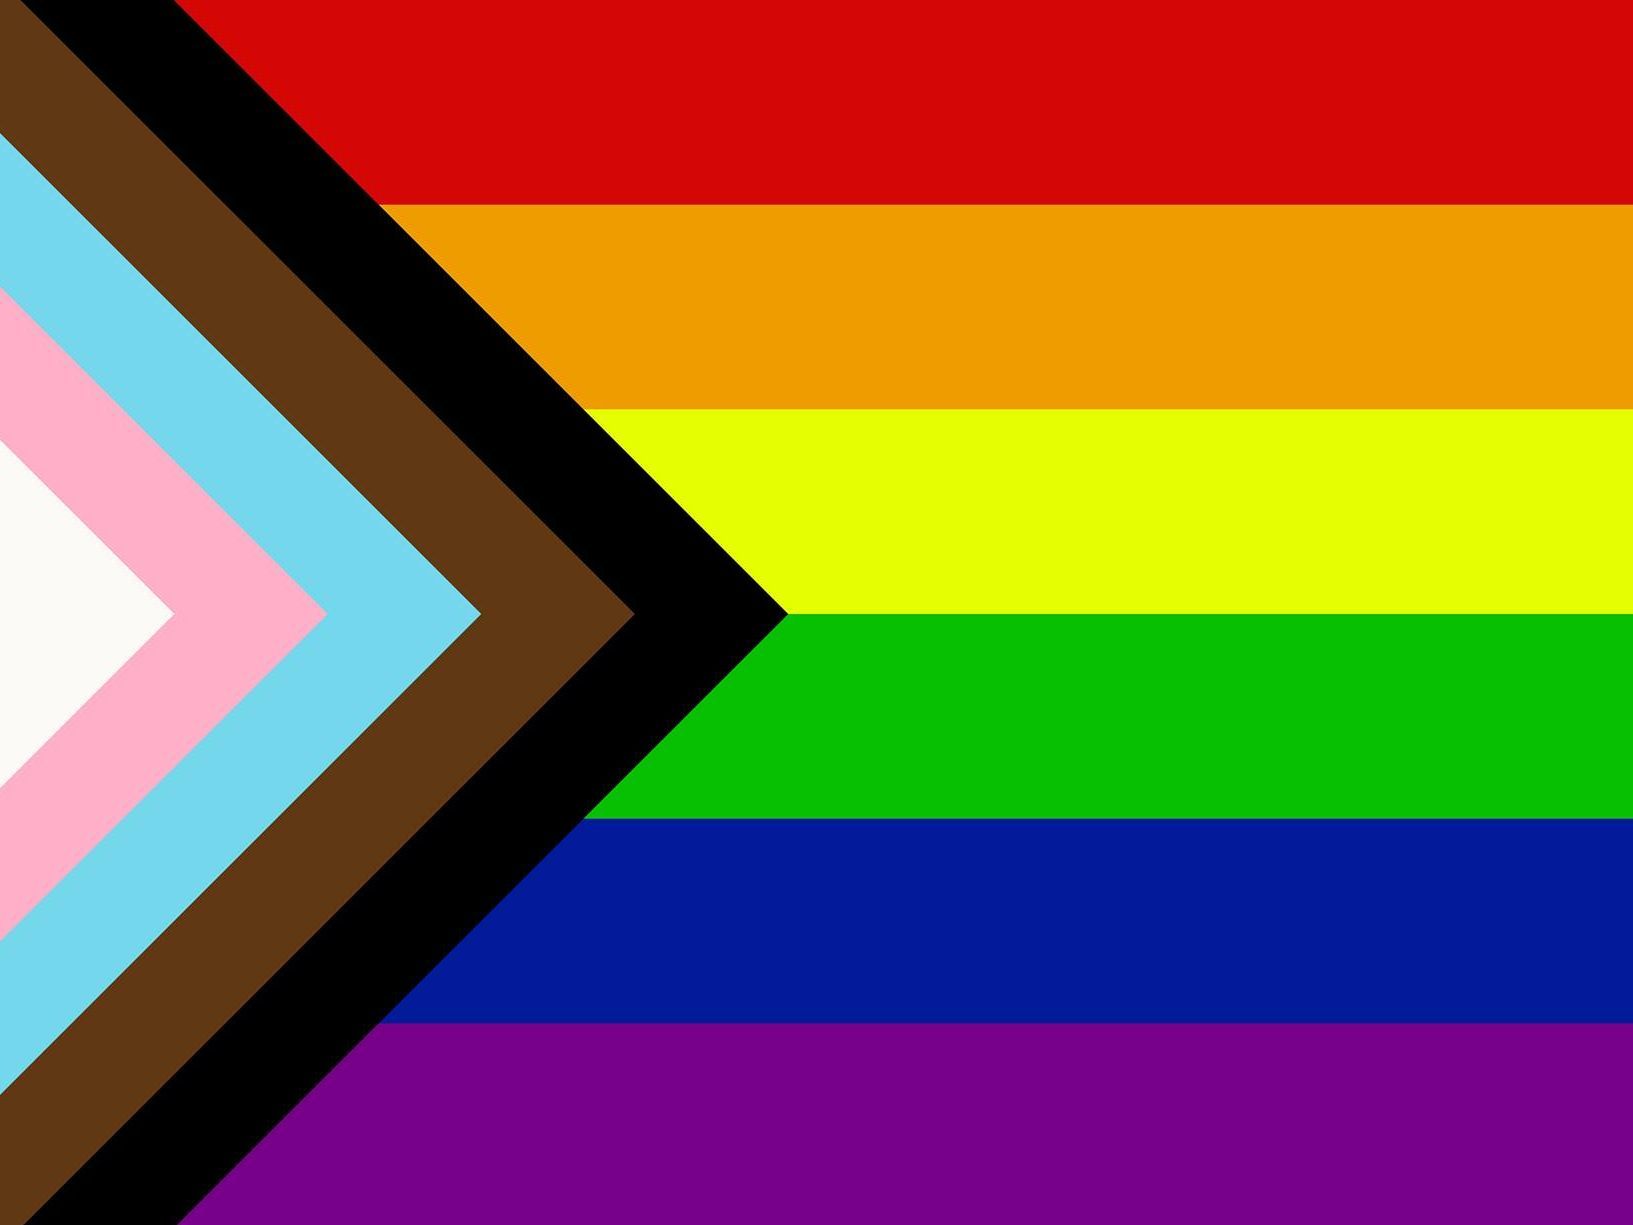 The LGBTQA flag, featuring the colors white, pink, light blue, brown, black, red, orange, yellow, green, blue, and purple